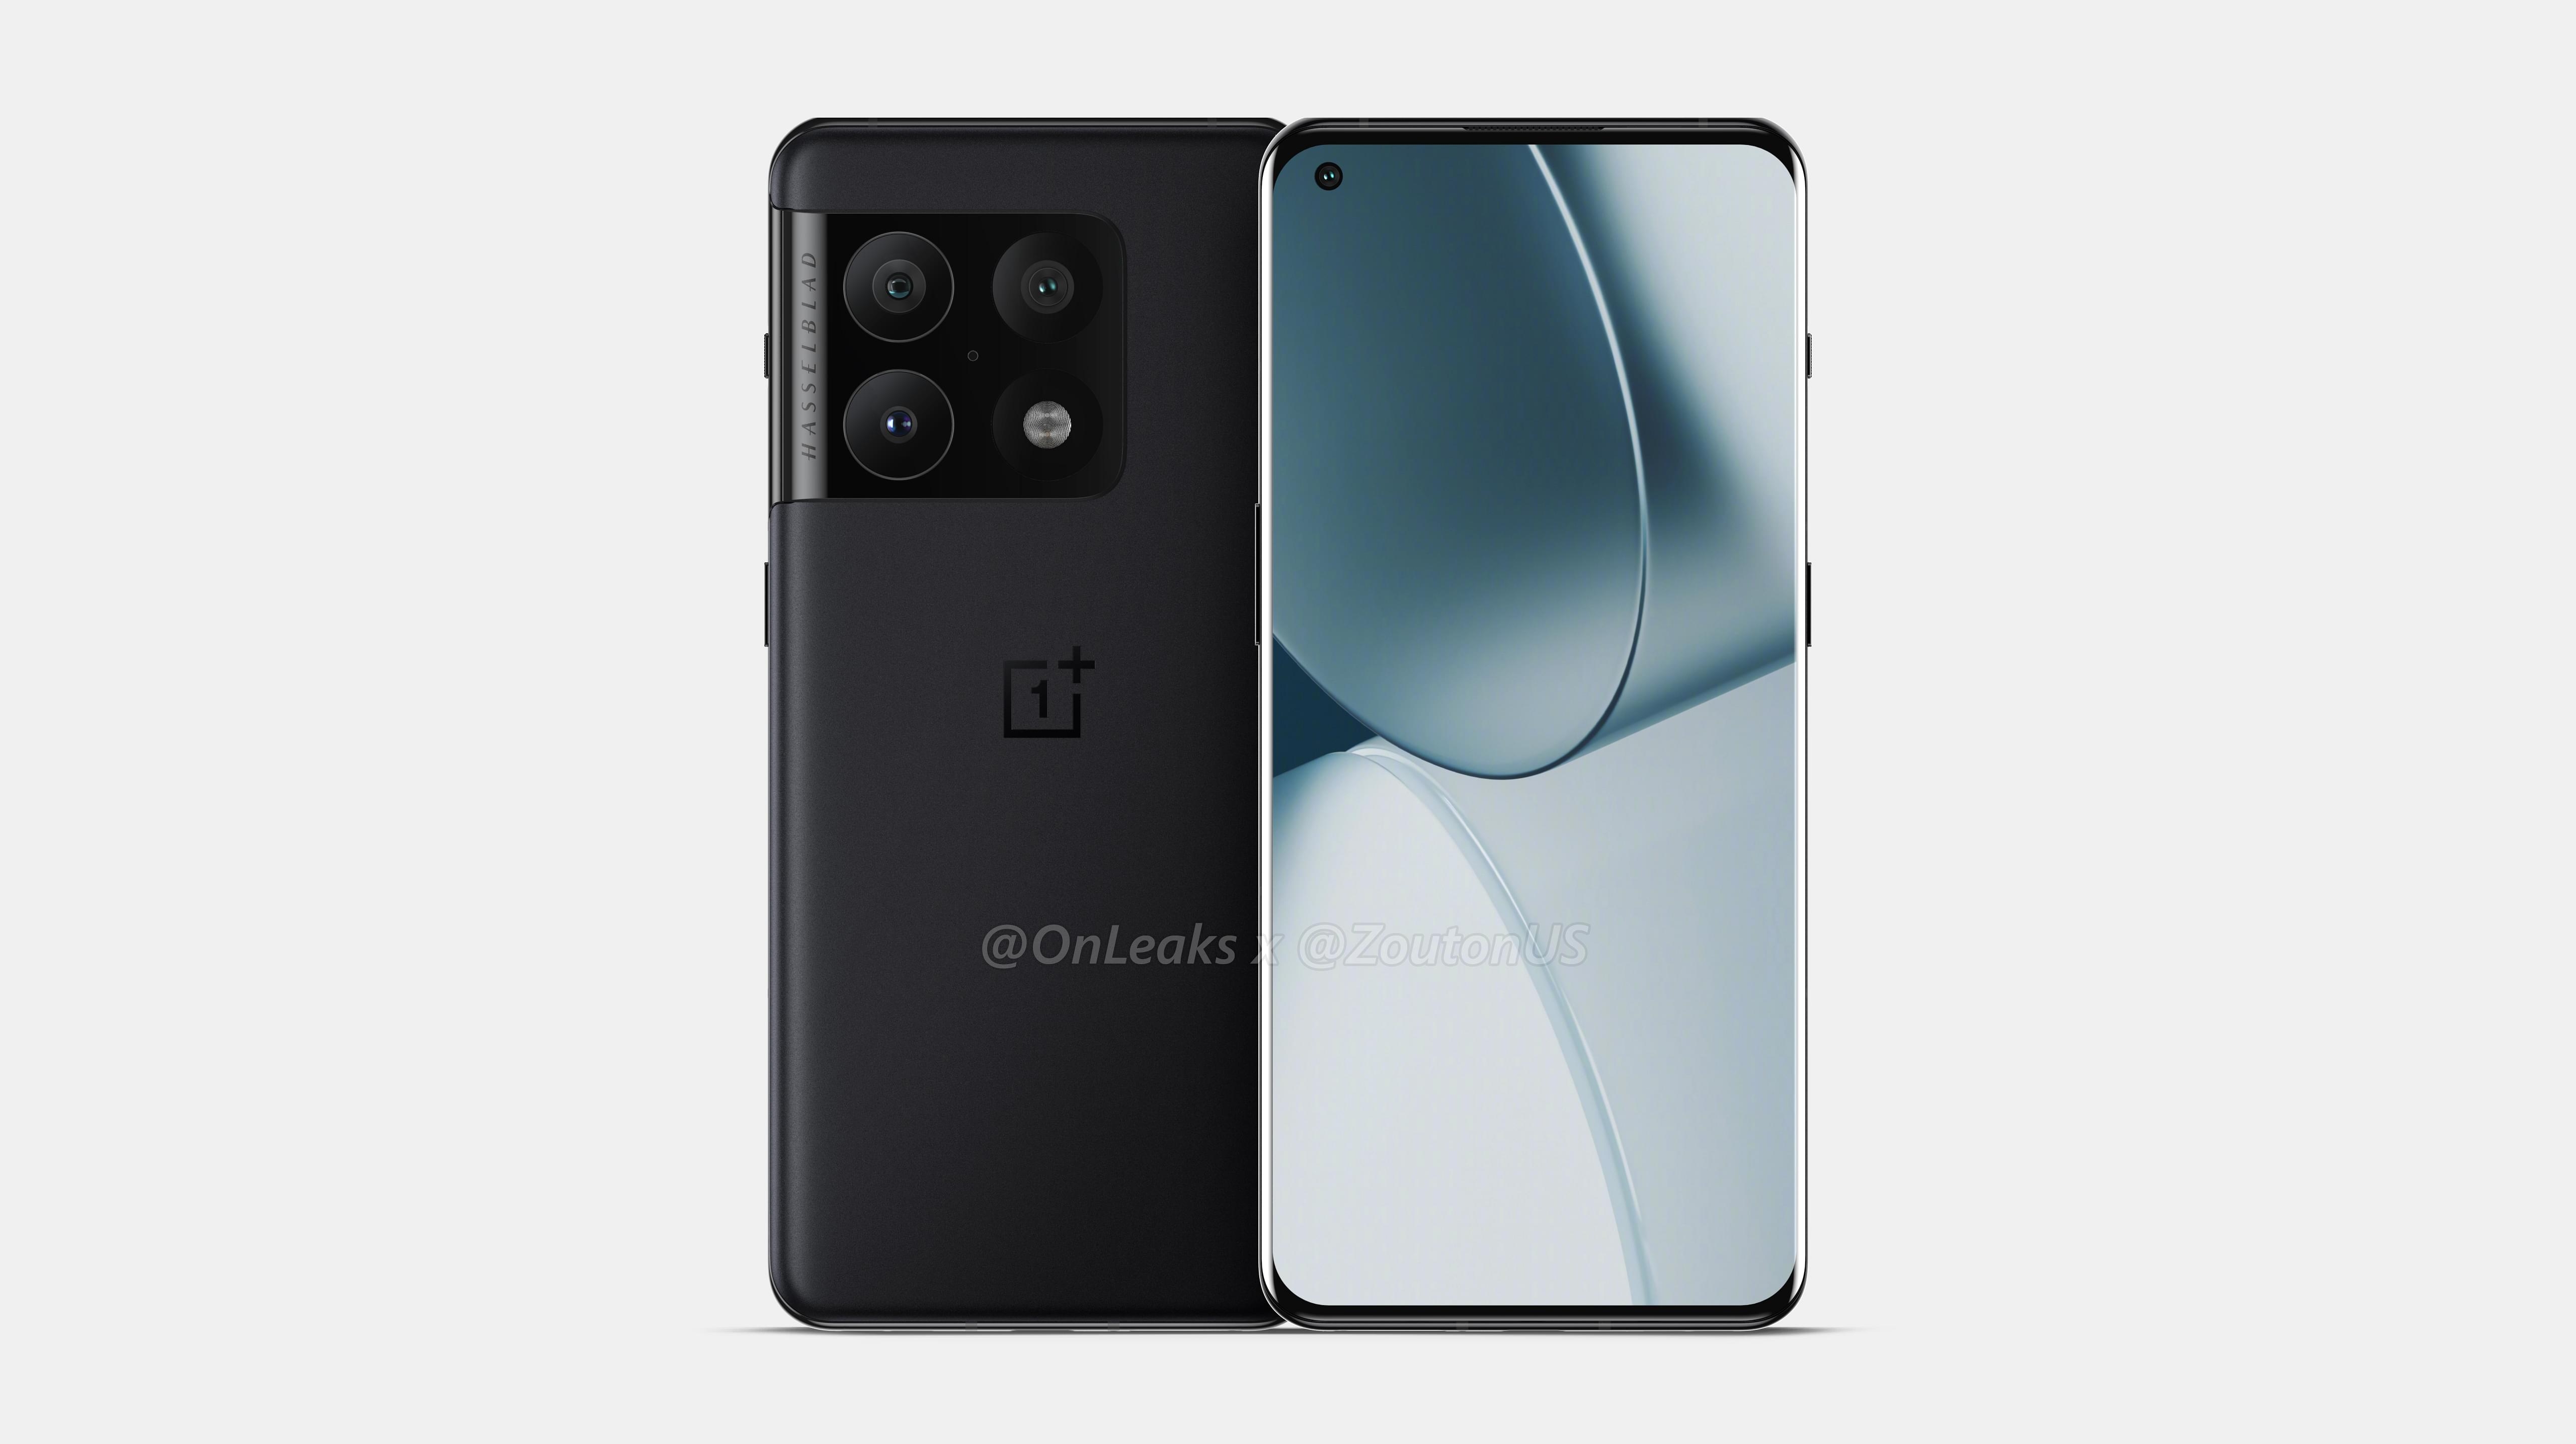 An unofficial render showing the OnePlus 10 Pro from the front and back